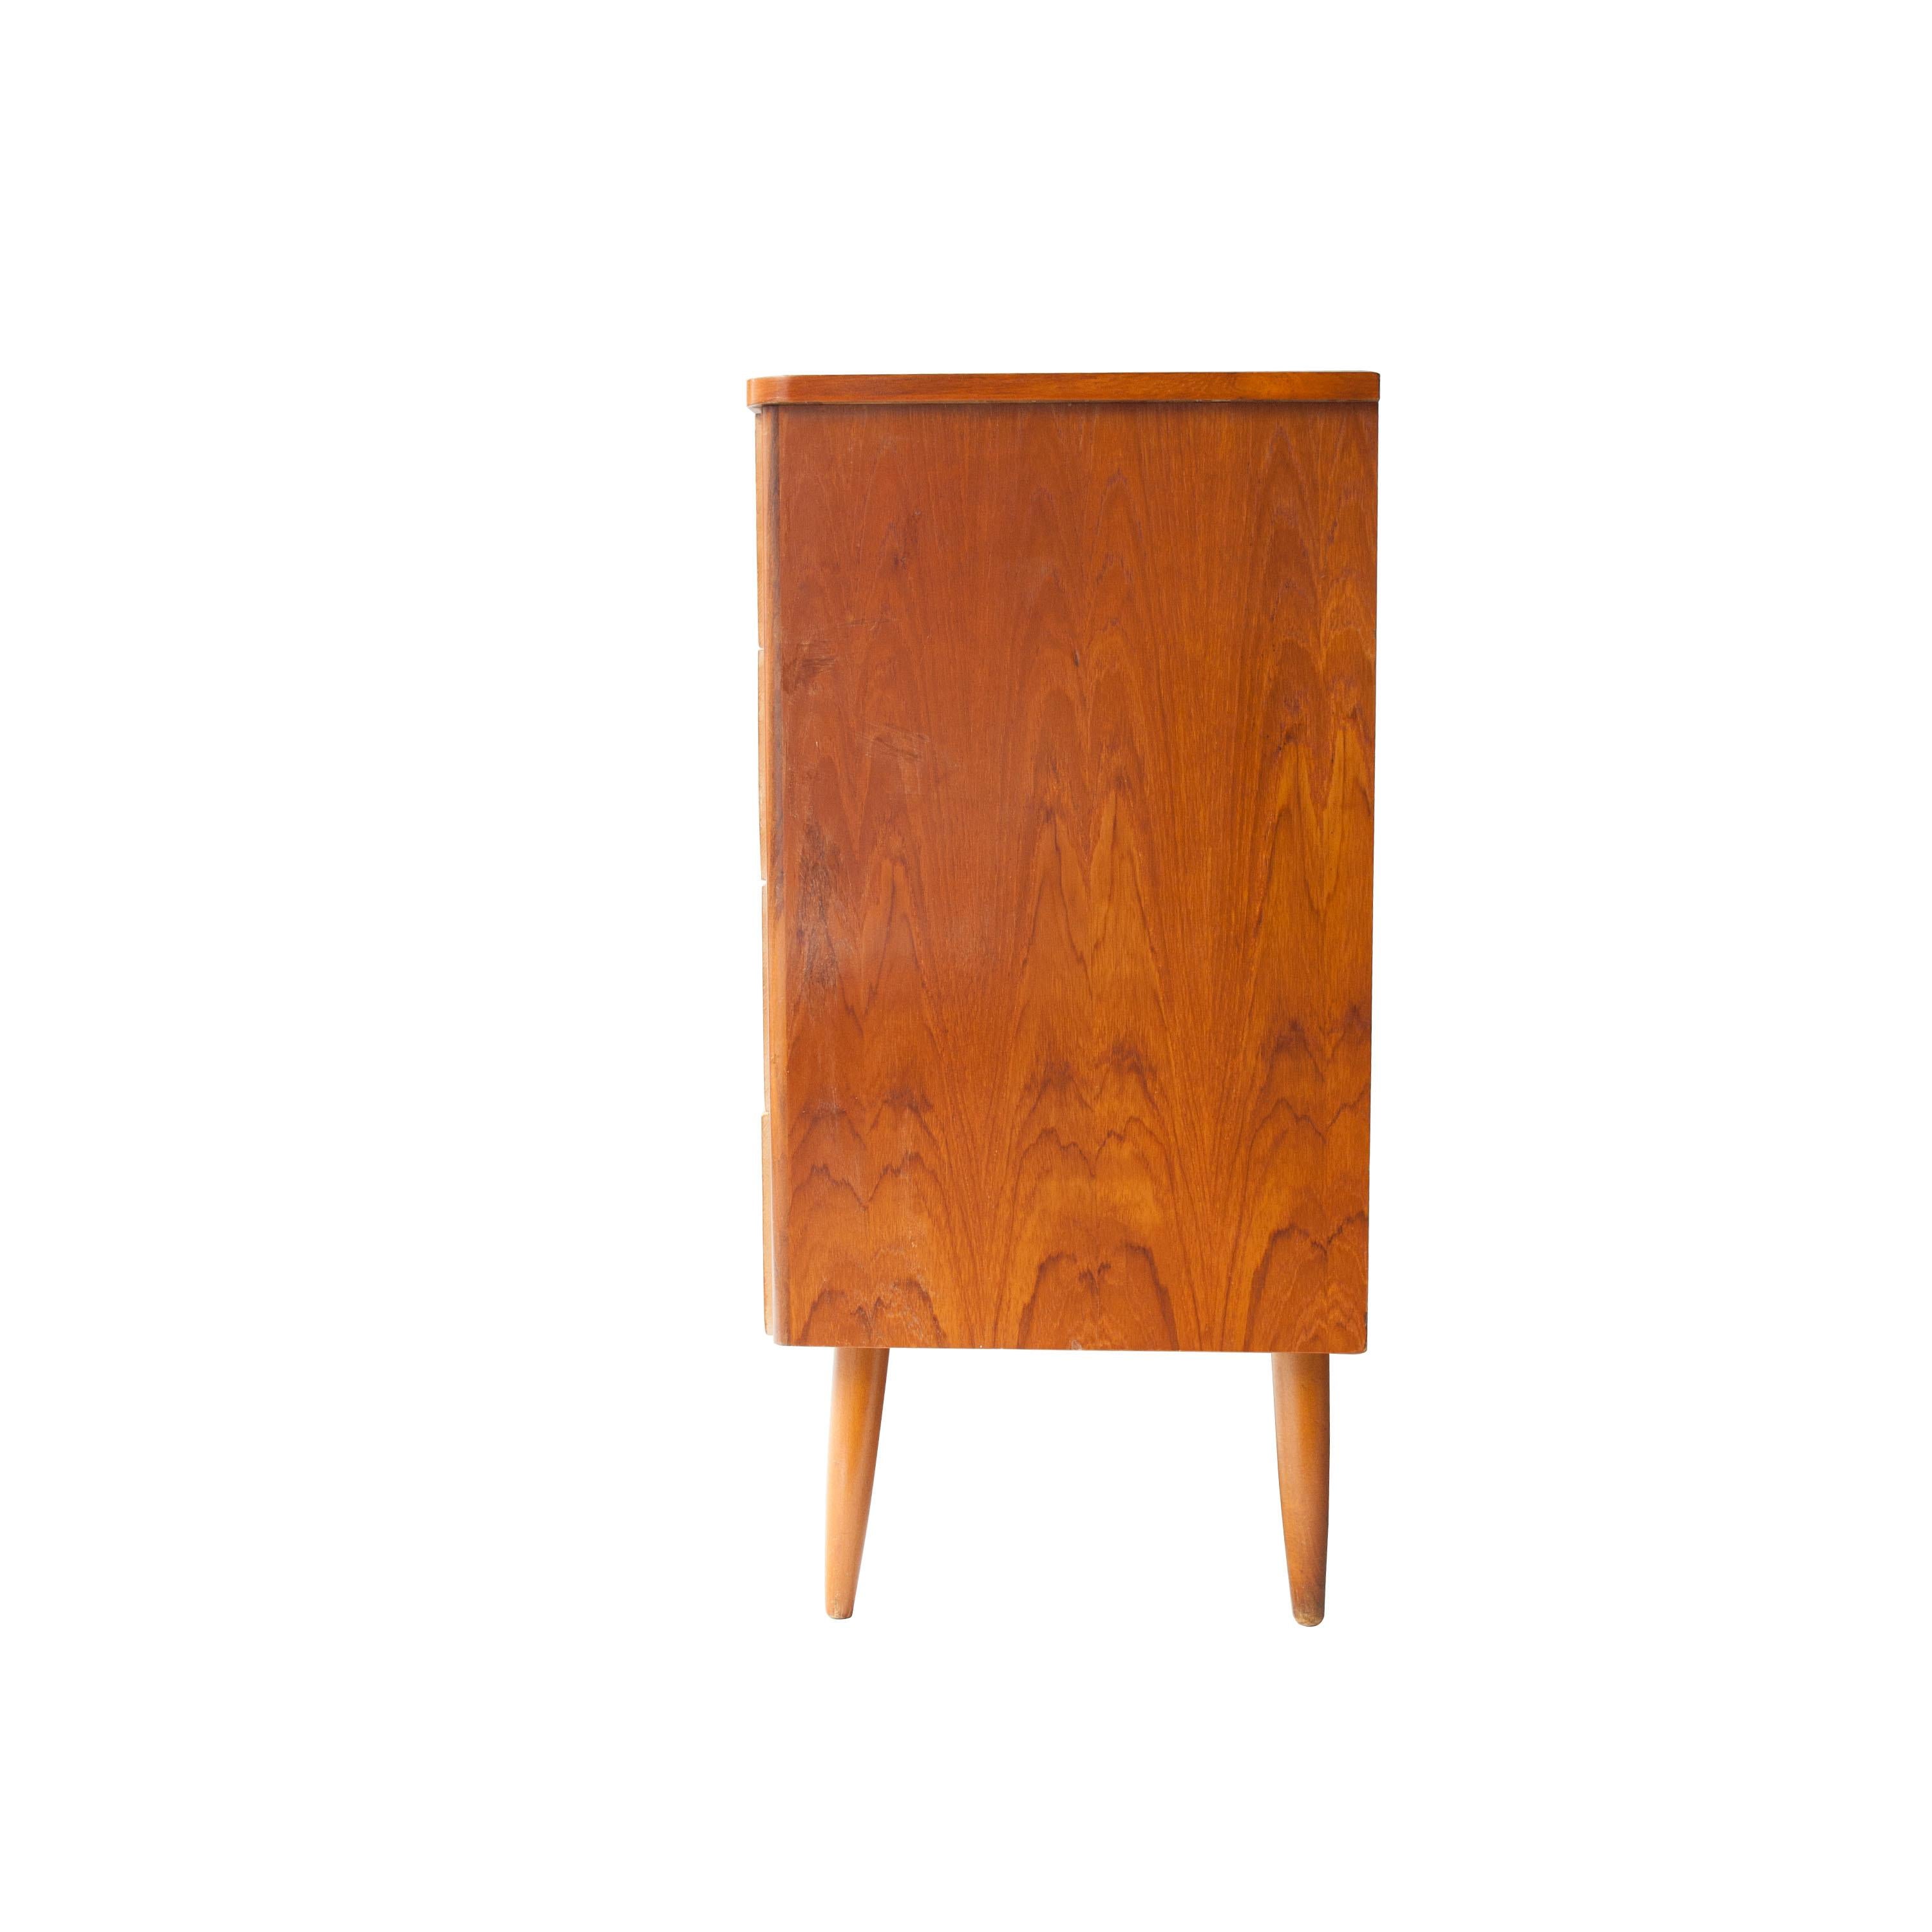 Swedish sideboard with teak structure, four drawers and conical legs.